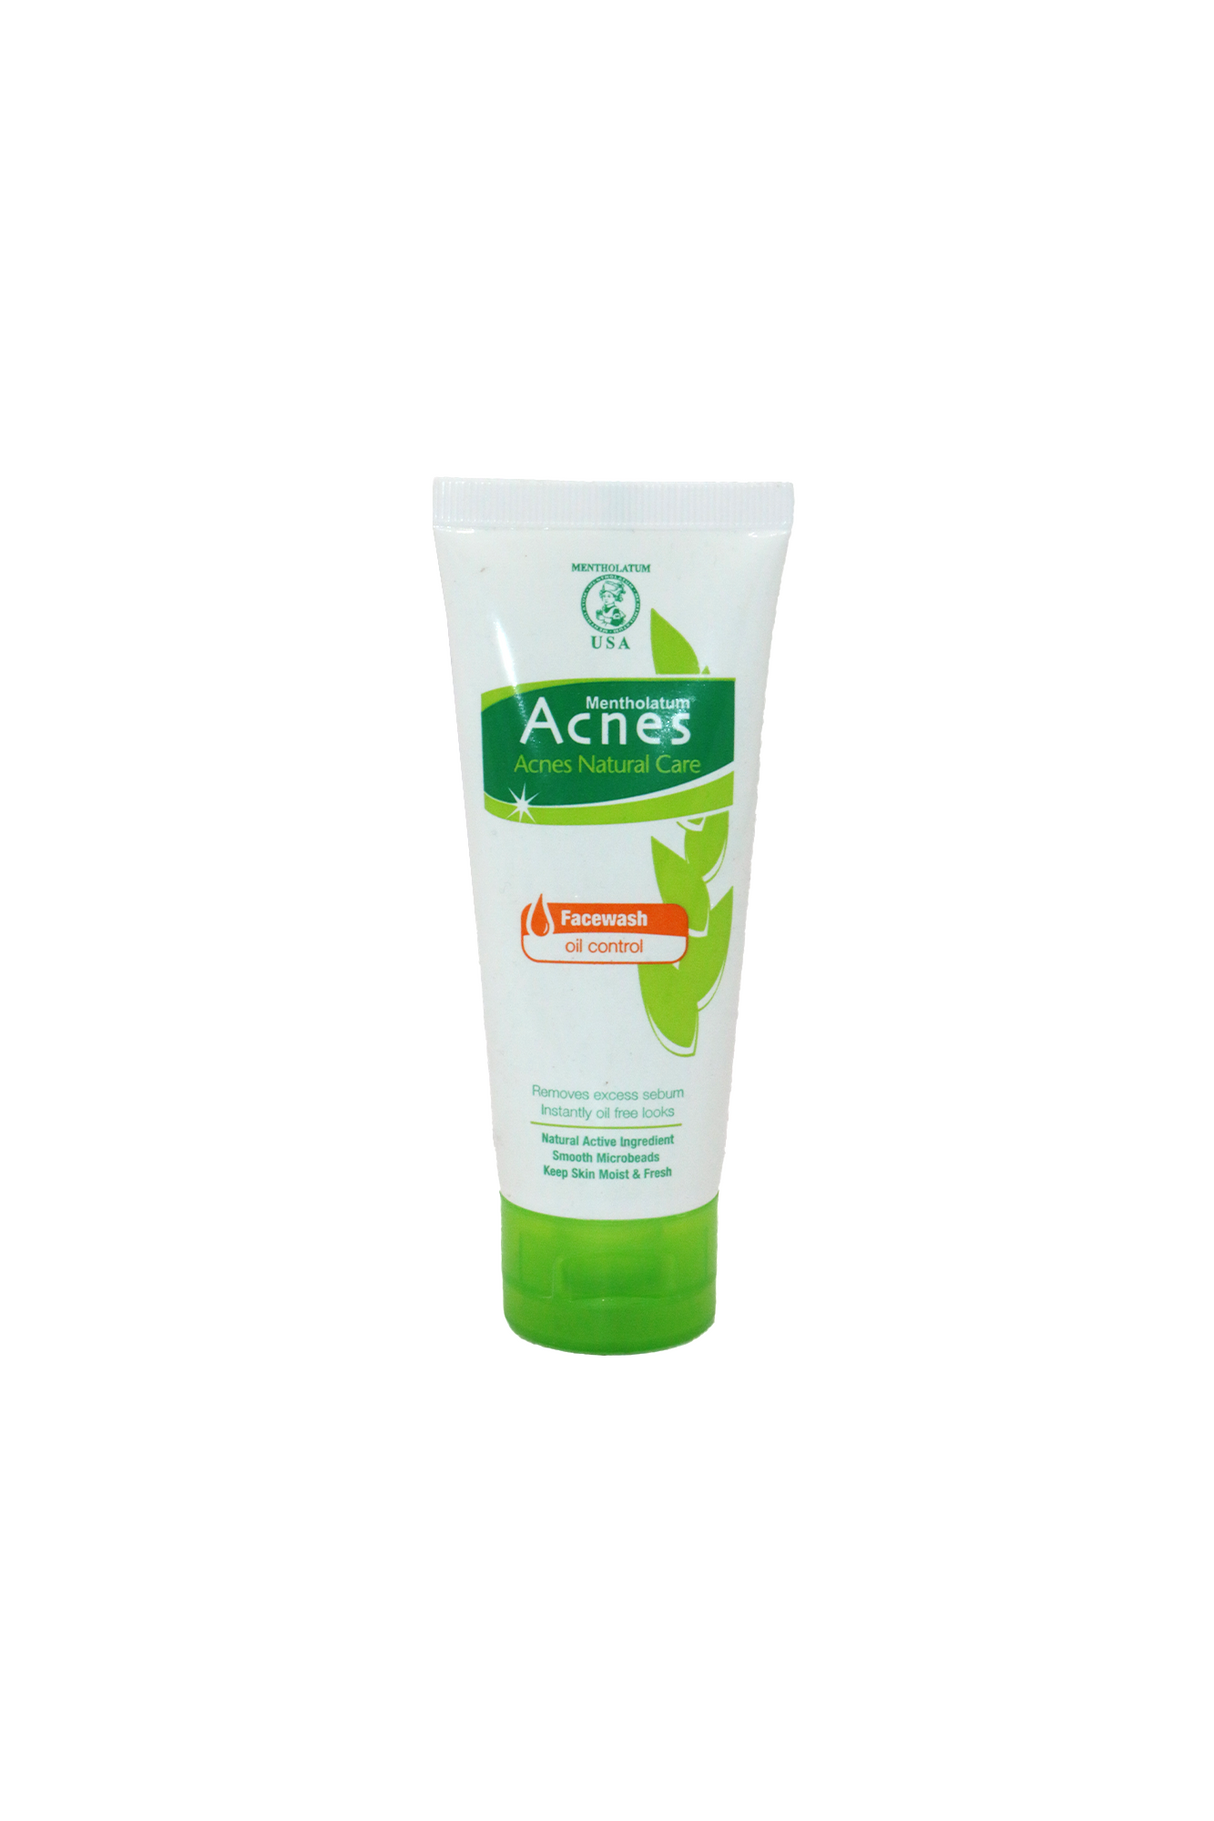 acnes face wash oil control 50g